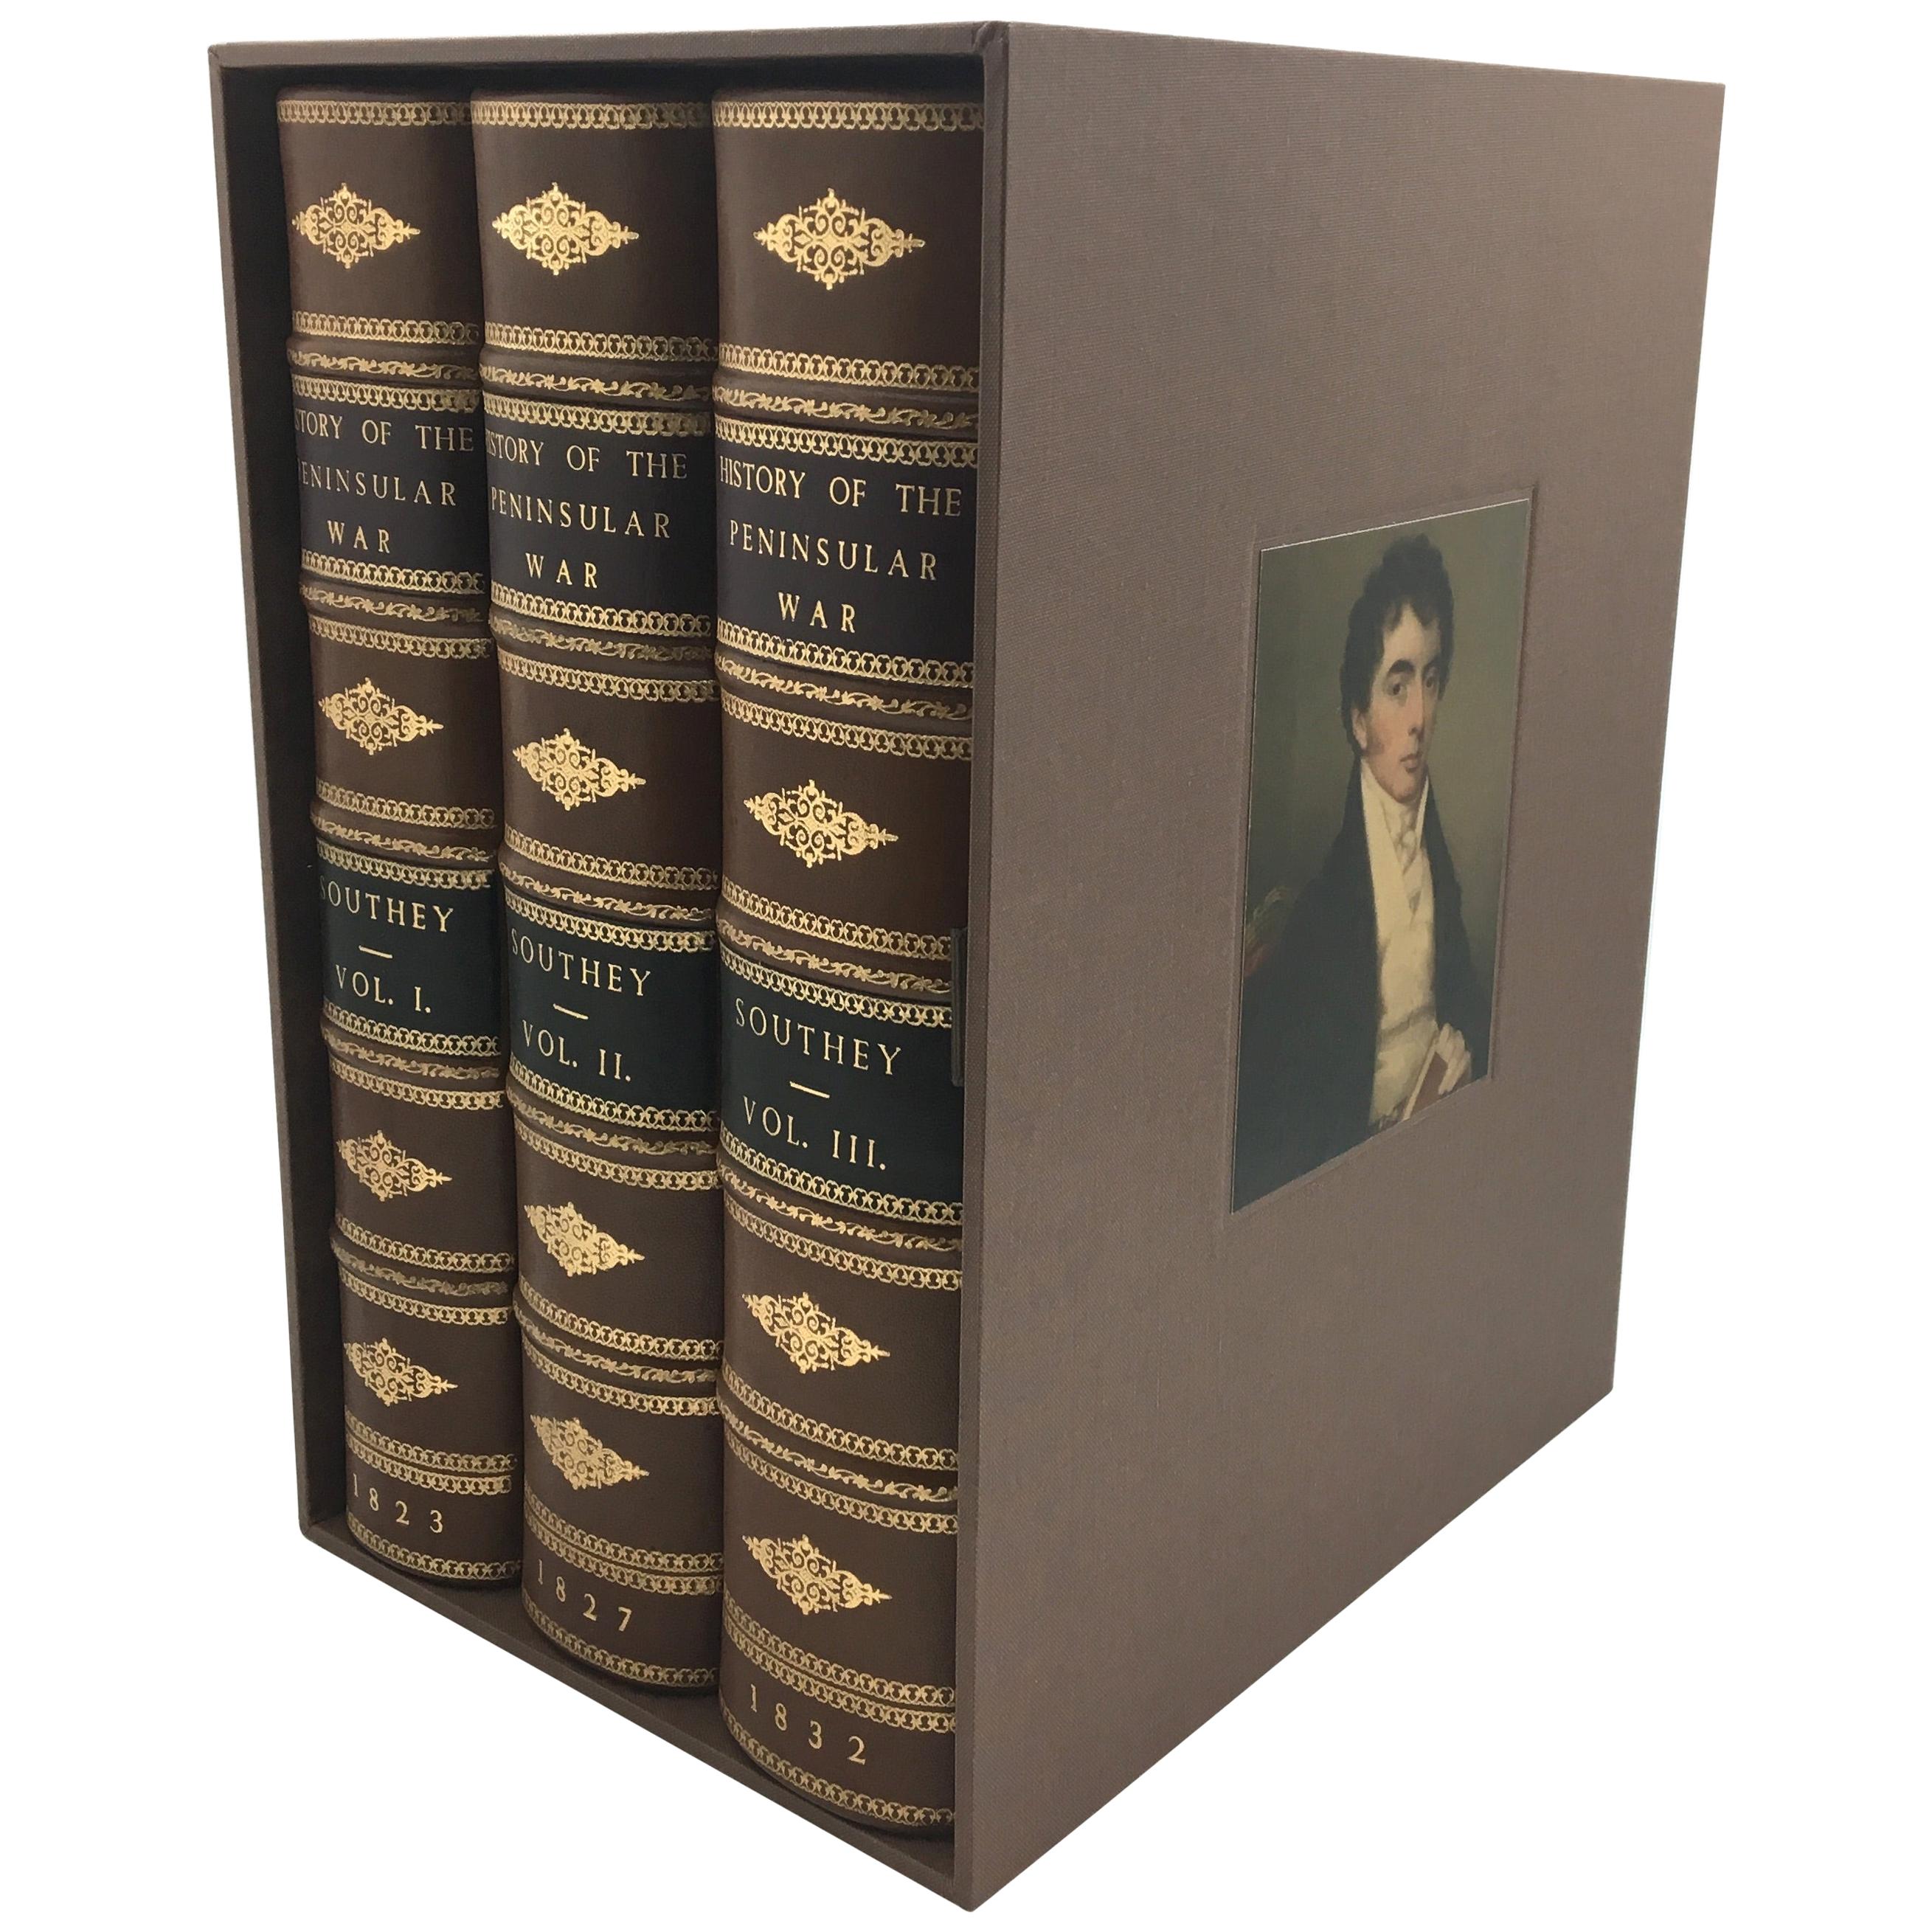 "History of the Peninsular War" by Robert Southey, First Edition Set, 1823-1832